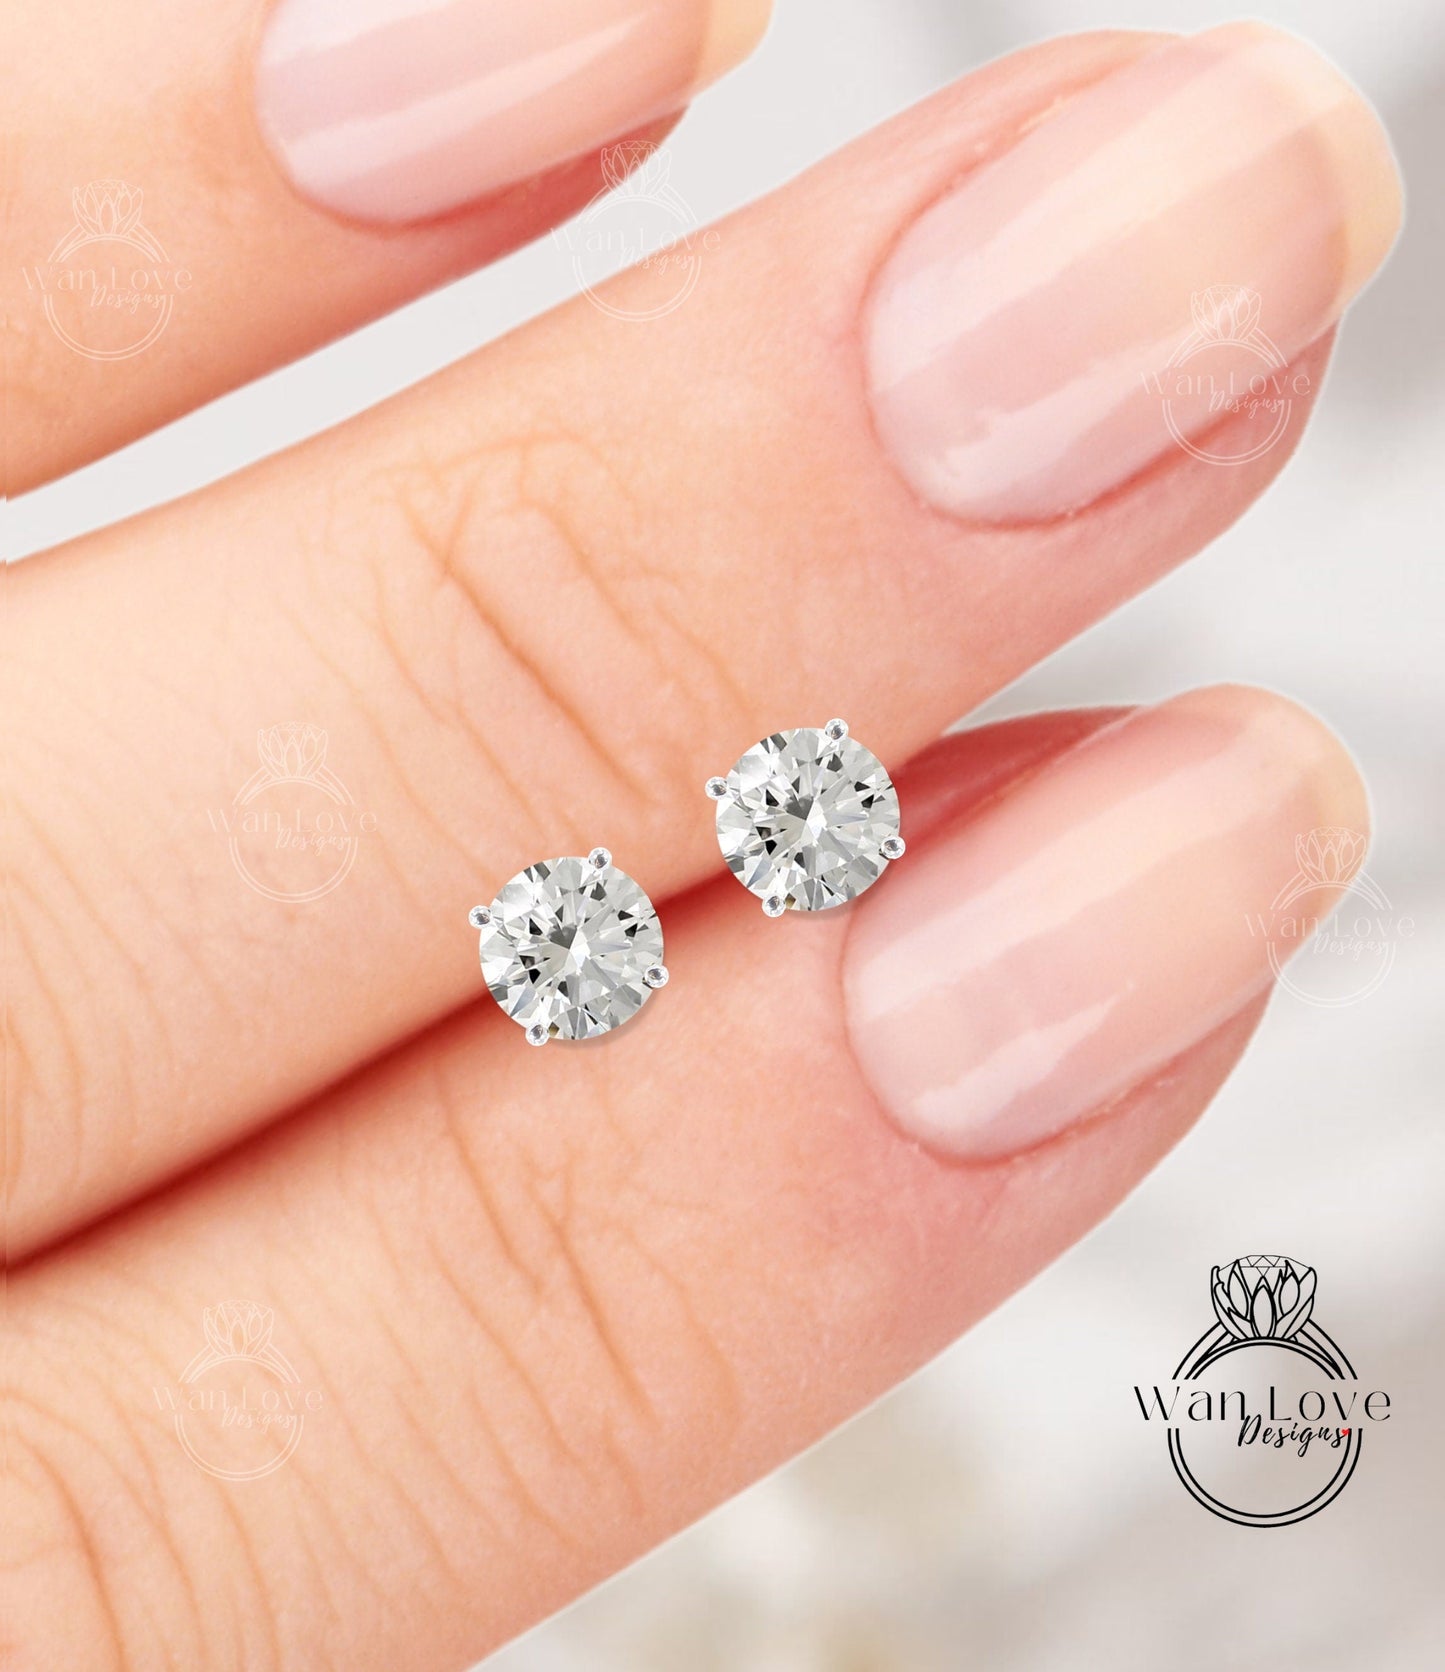 2ct Moissanite Diamond Studs by WanLoveDesigns • Dainty Birthstone Earrings • Perfect Everyday Stud Earrings, Round Gemstone Earrings Wan Love Designs